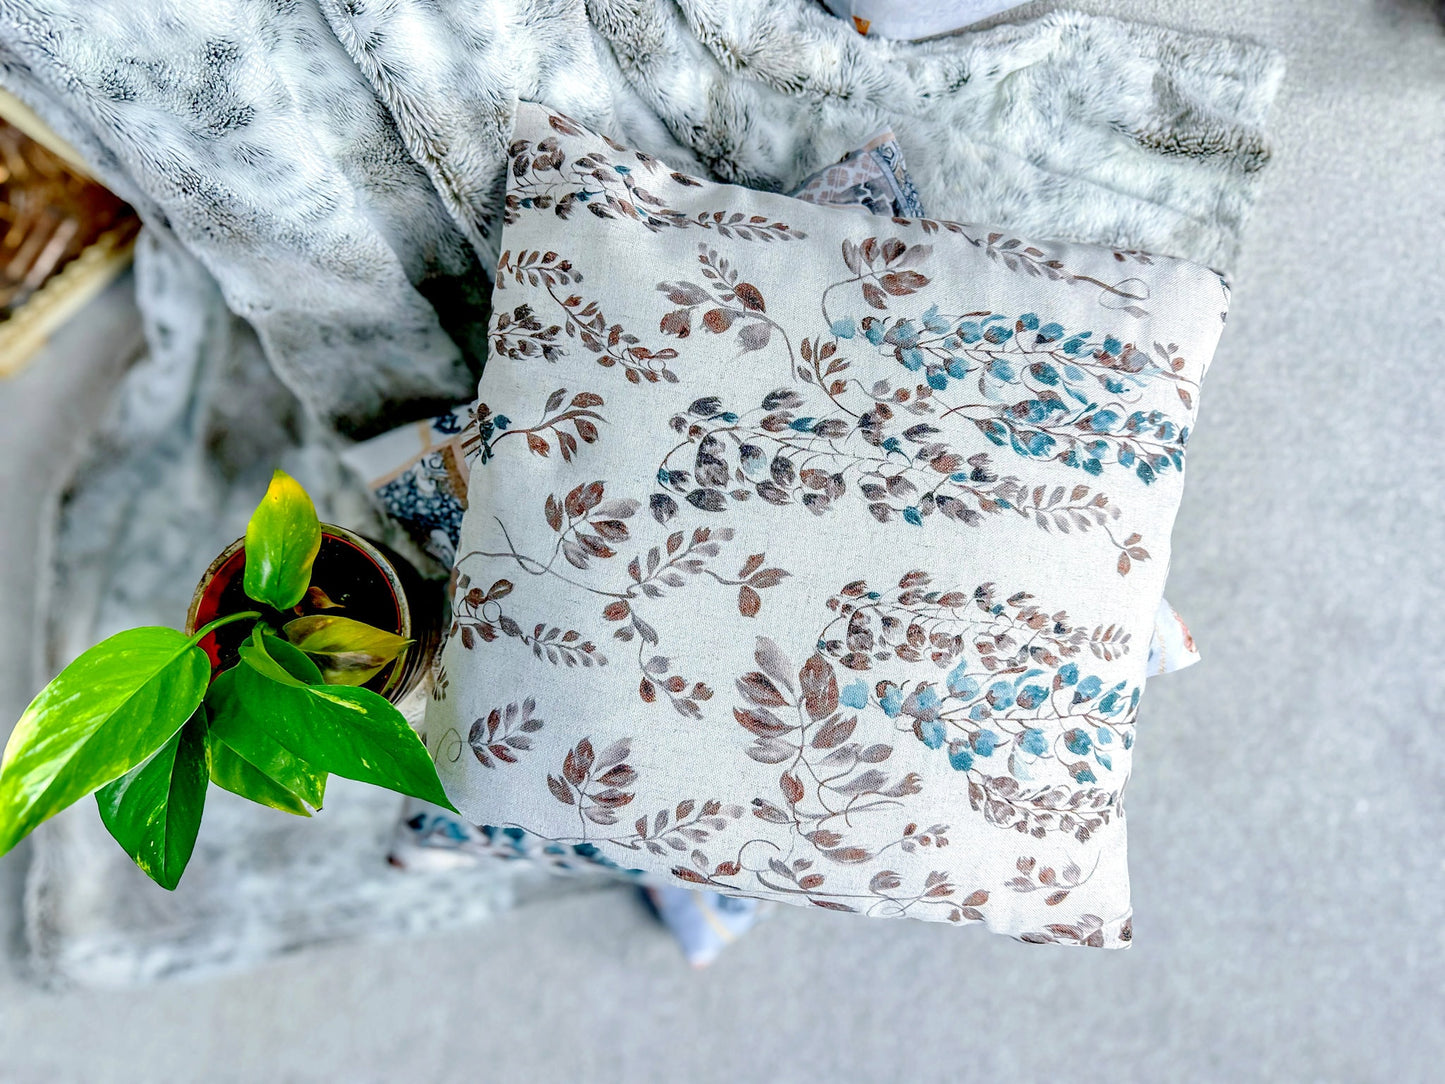 Spring decorations, spring cushion cover, pillow cover, Personalized pillow, new home gift, lumbar pillow, linen, Home Decor, Floral pattern, Decorative Pillow, custom cushion cover, cushion cover, cotton pillow cover mossartbyrishstudio